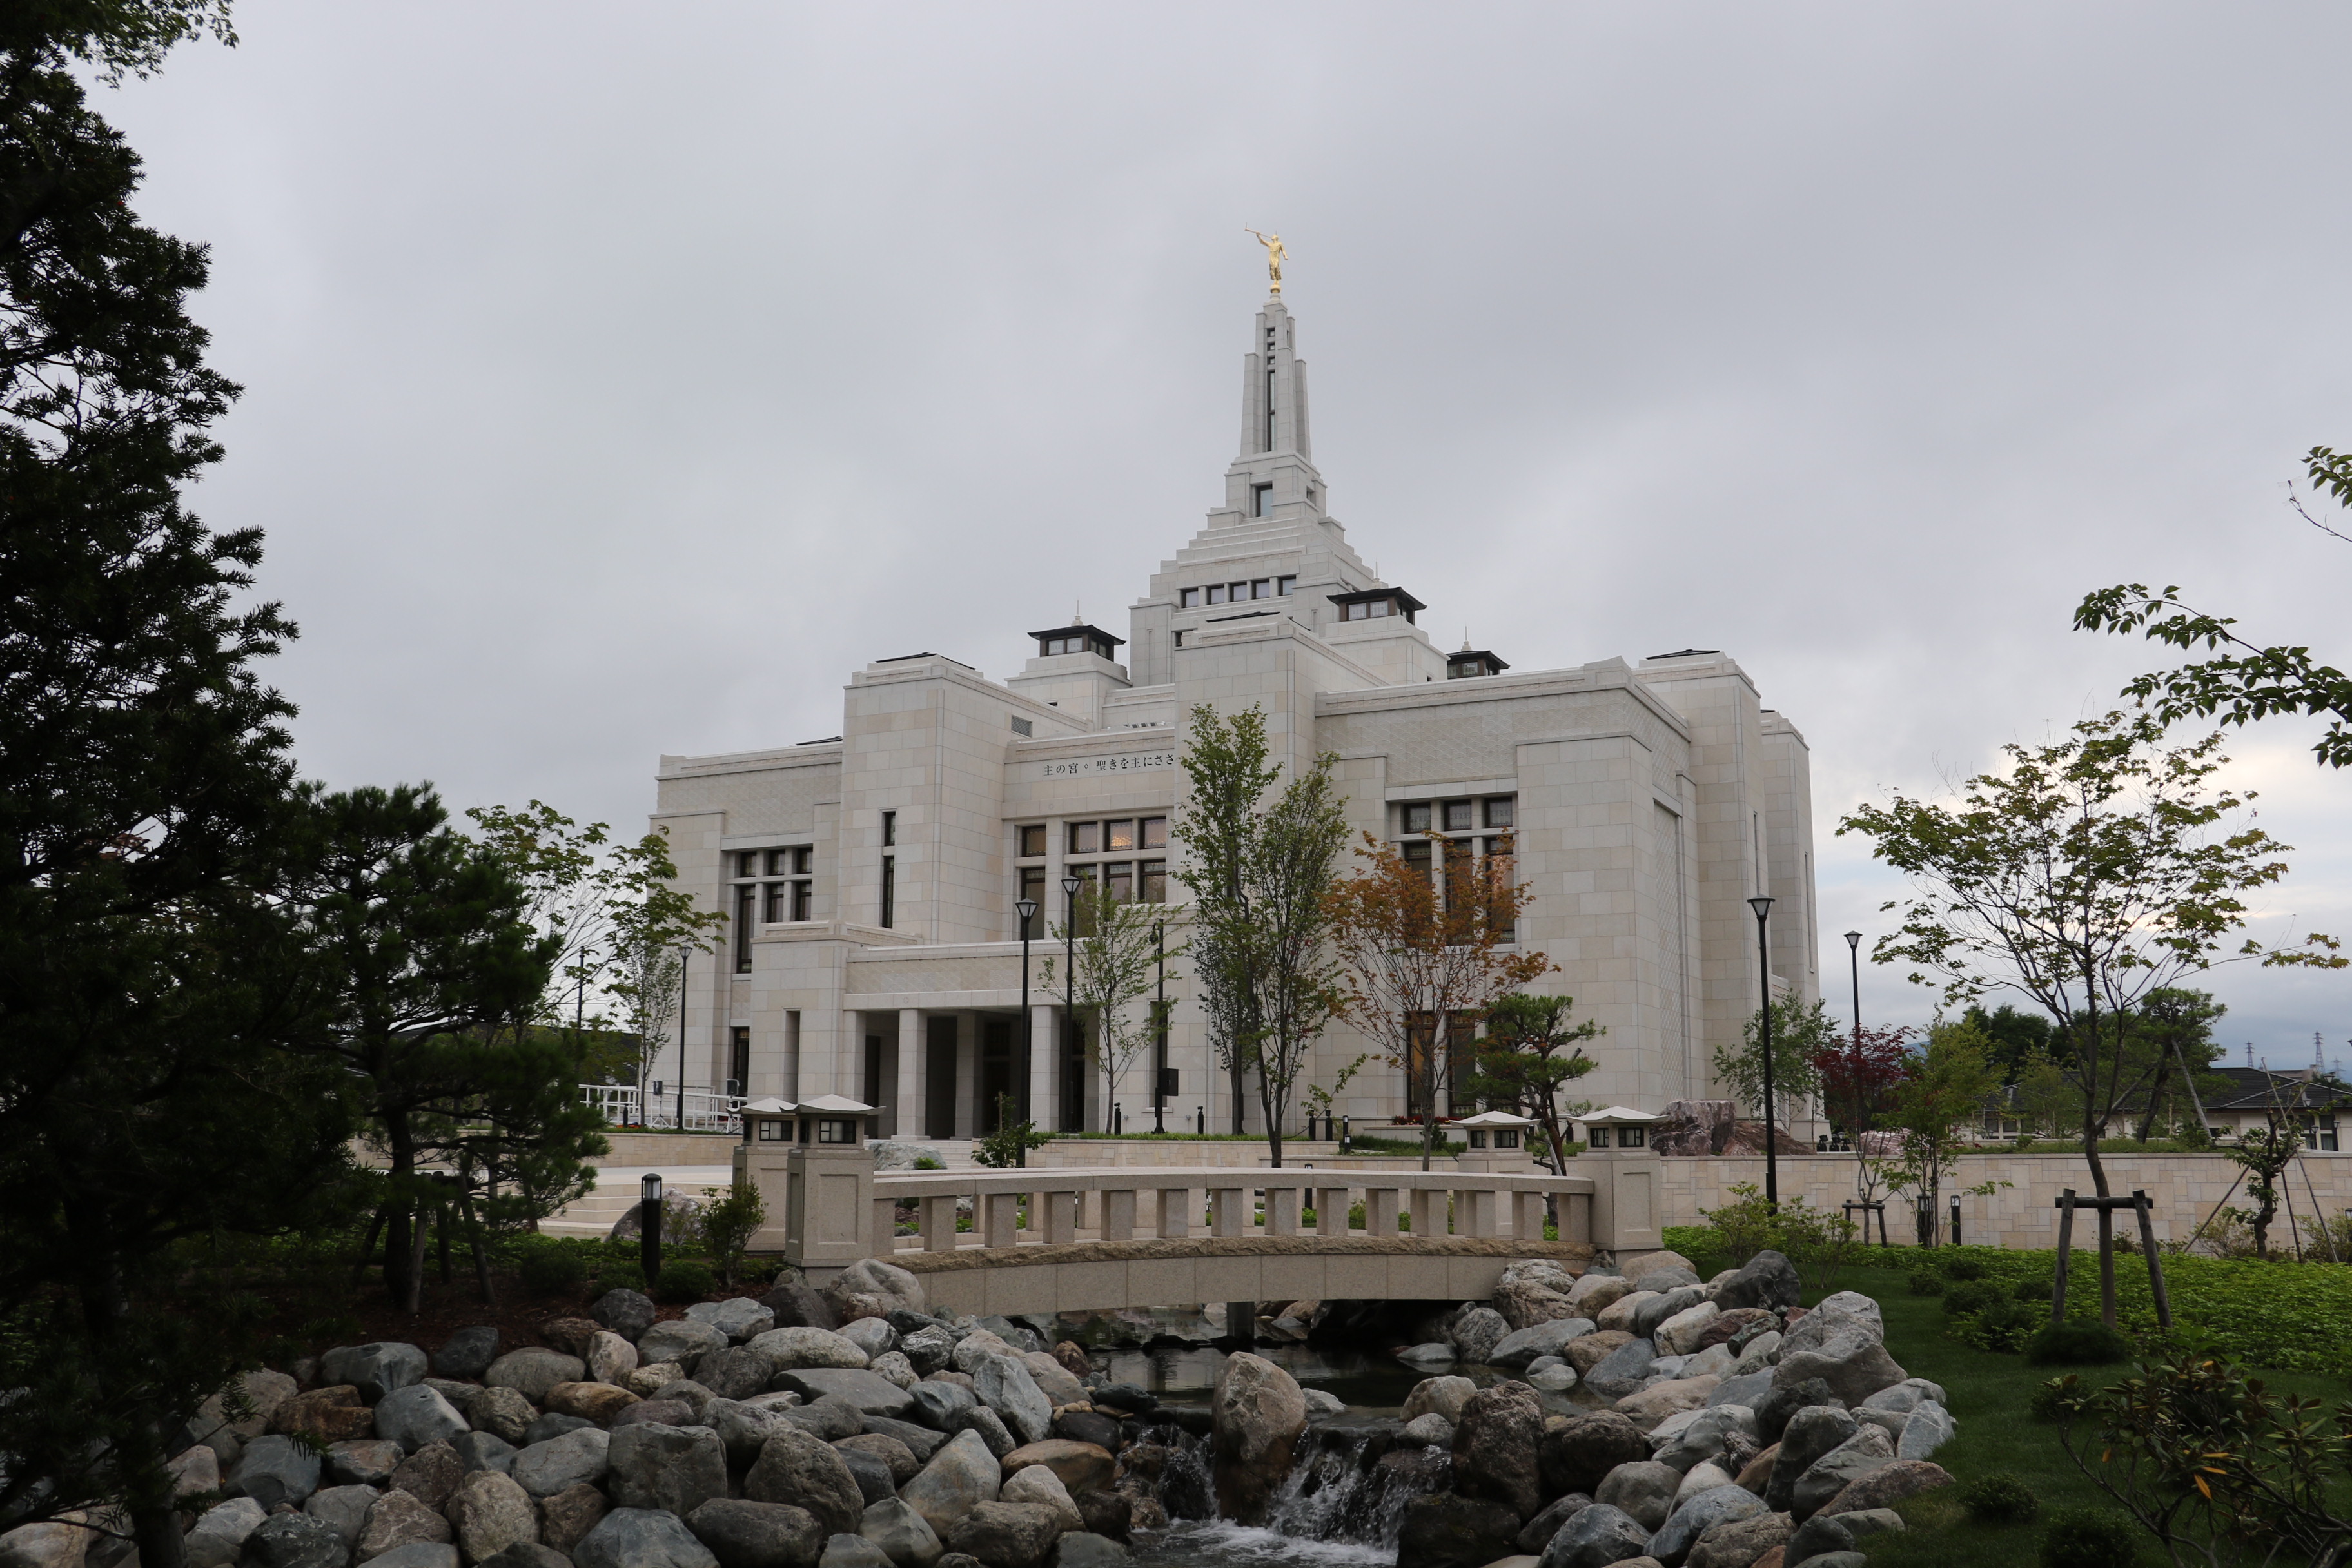 The Sapporo Japan Temple, a white building with a spire topped by a golden statue of an angel blowing a trumpet.